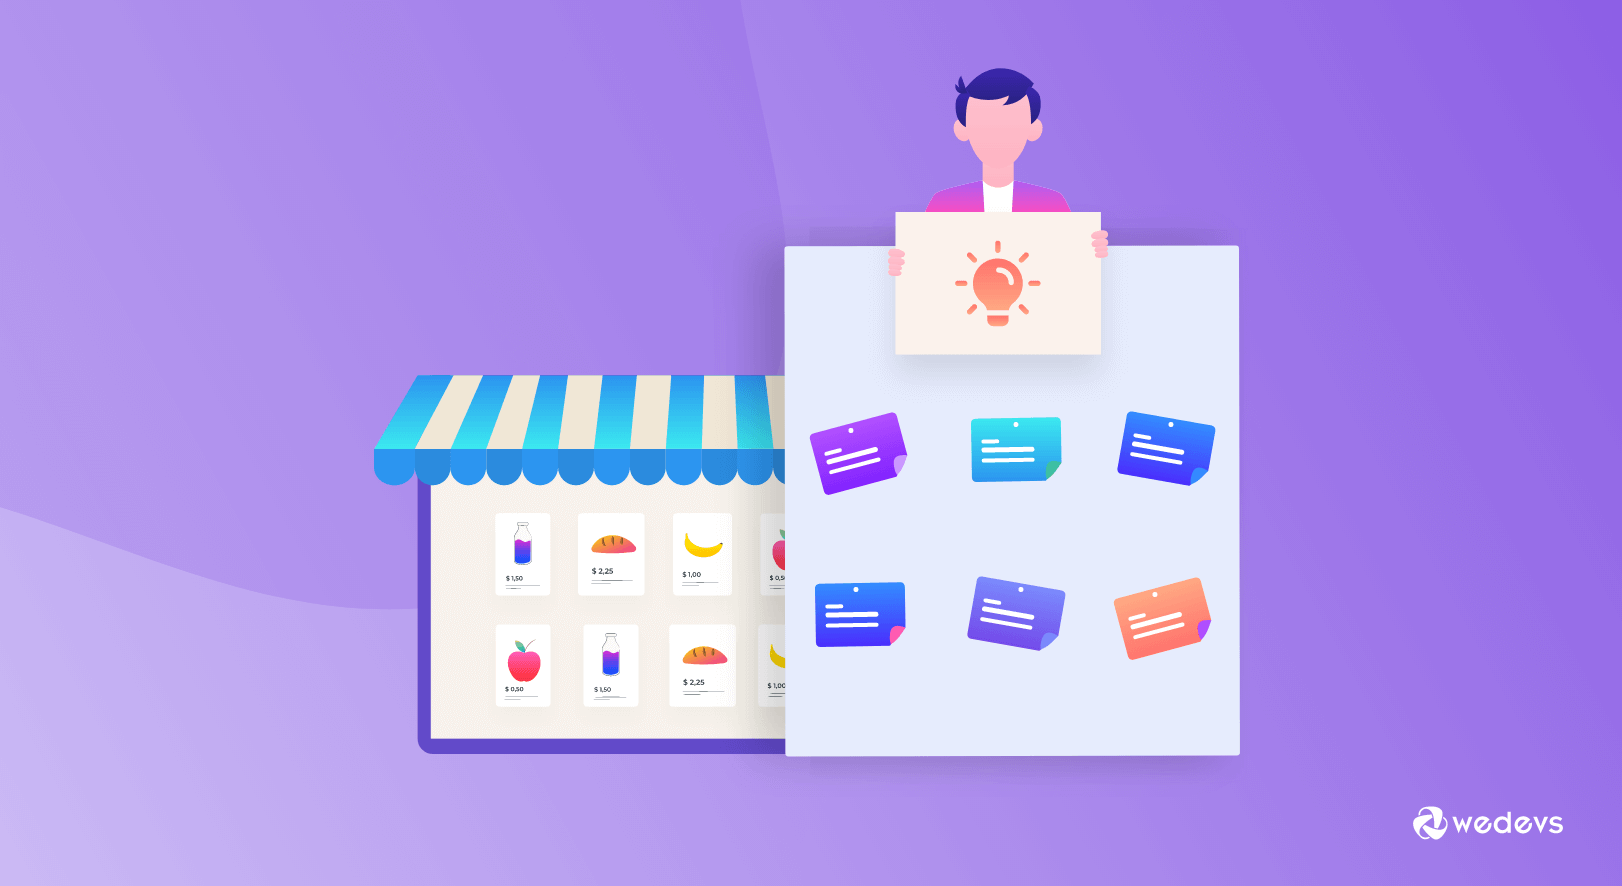 How To Write an Effective eCommerce Business Plan